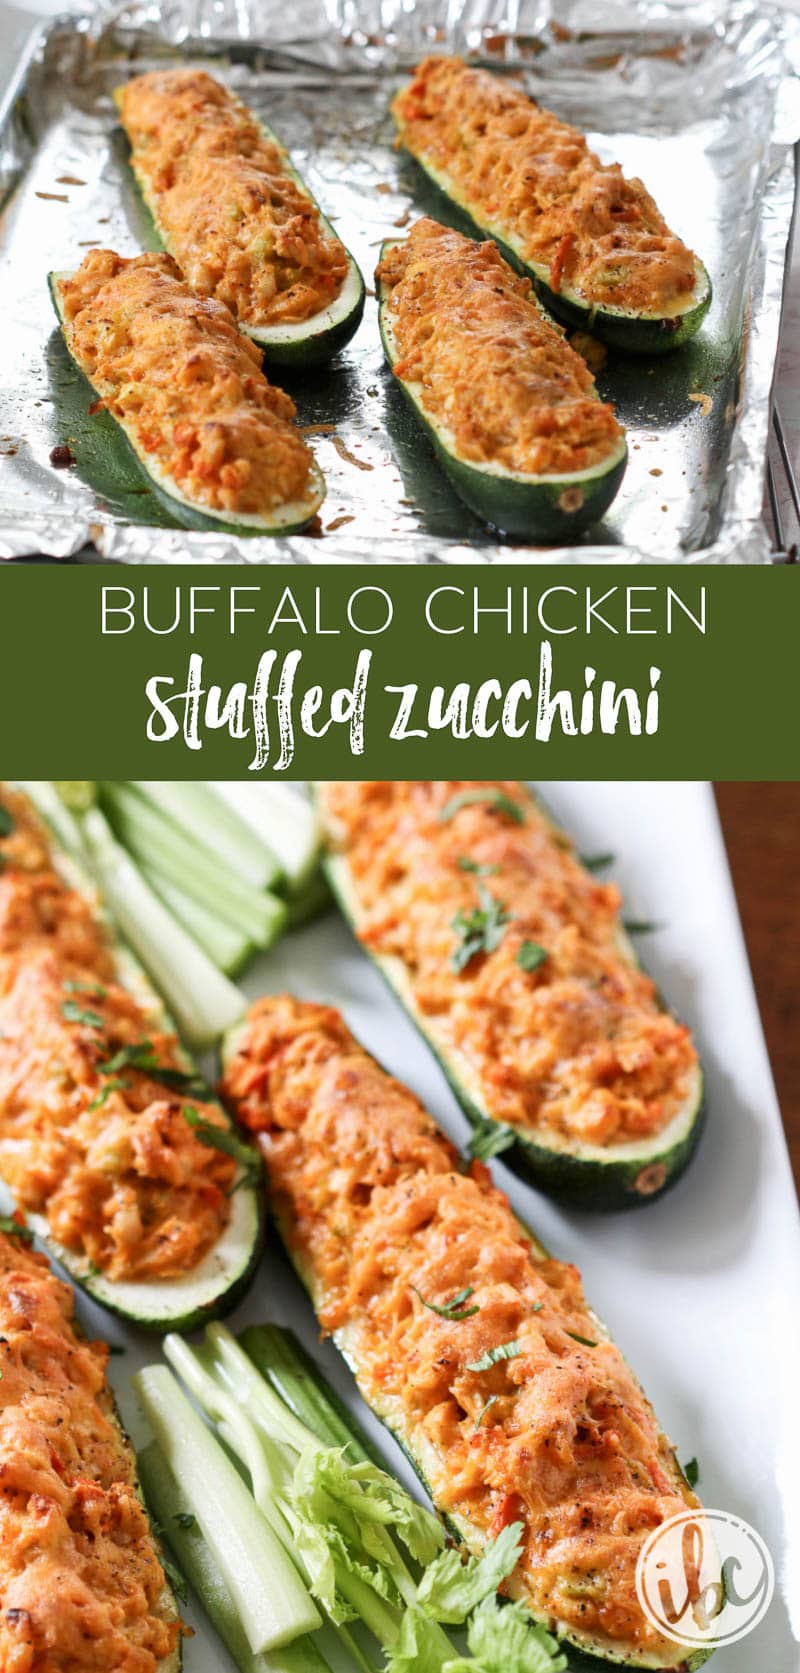 These Buffalo Chicken Stuffed Zucchini Boats make a delicious meal or appetizer. I love stuffed zucchini and this recipe is one of my favorites because it's loaded with flavor! #buffalochicken #chicken #buffalo #zucchini #stuffedzucchini